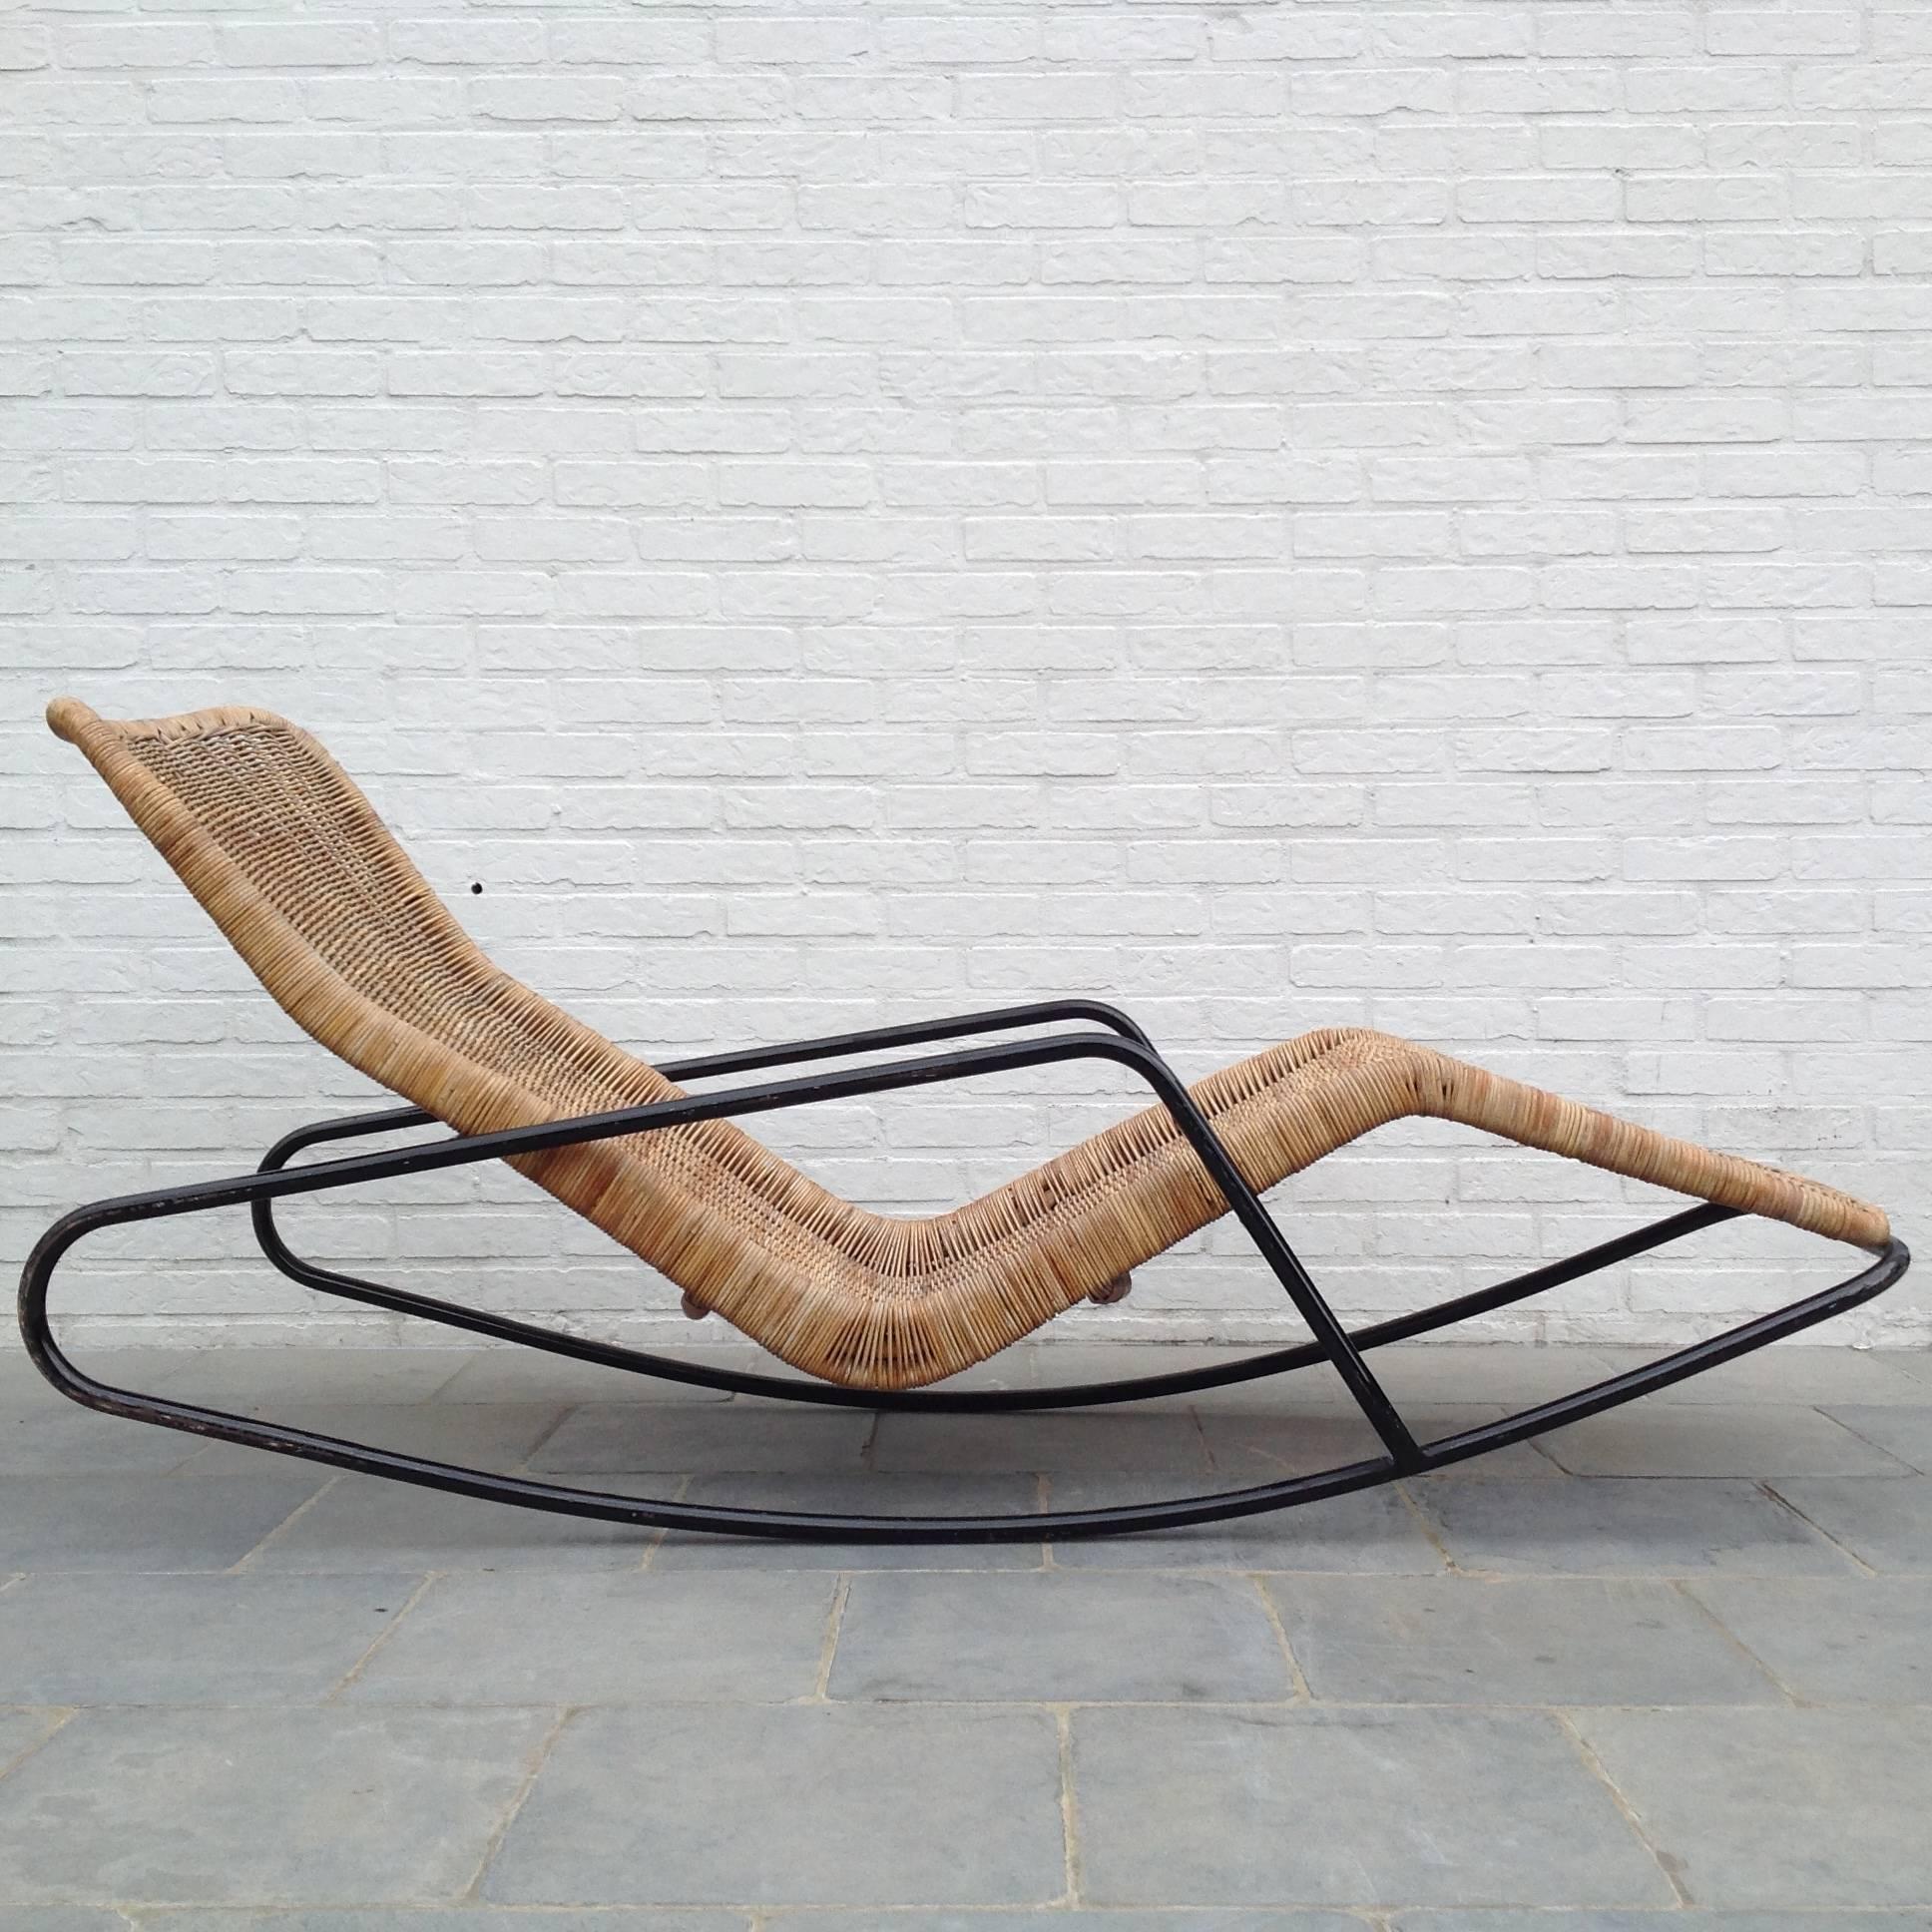 Rare and beautiful modernist chaise longue with a very high quality.
Only some of these are made by the designer for Brothers Jonkers rattan factory The Netherlands in the 1950s-1960s.

More pictures and with a higher resolution are available on